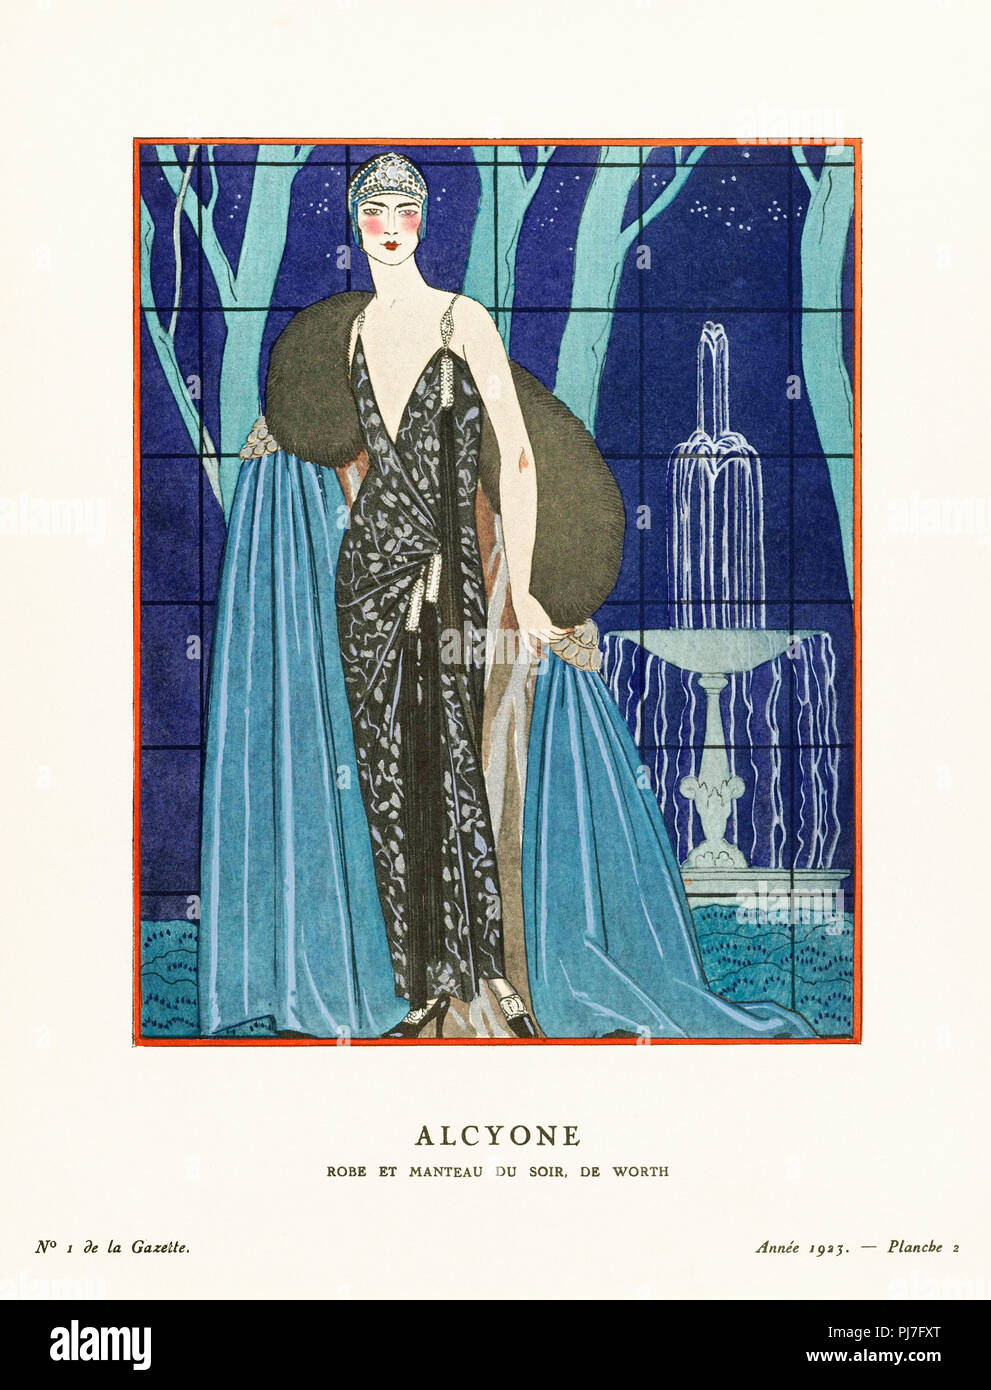 Alcyone.  Halcyon. Robe et Manteau du soir, de Worth.  Evening dress and coat by Worth.  Art-deco fashion illustration by French artist George Barbier, 1882-1932.  The work was created for the Gazette du Bon Ton, a Parisian fashion magazine published between 1912-1915 and 1919-1925. Stock Photo